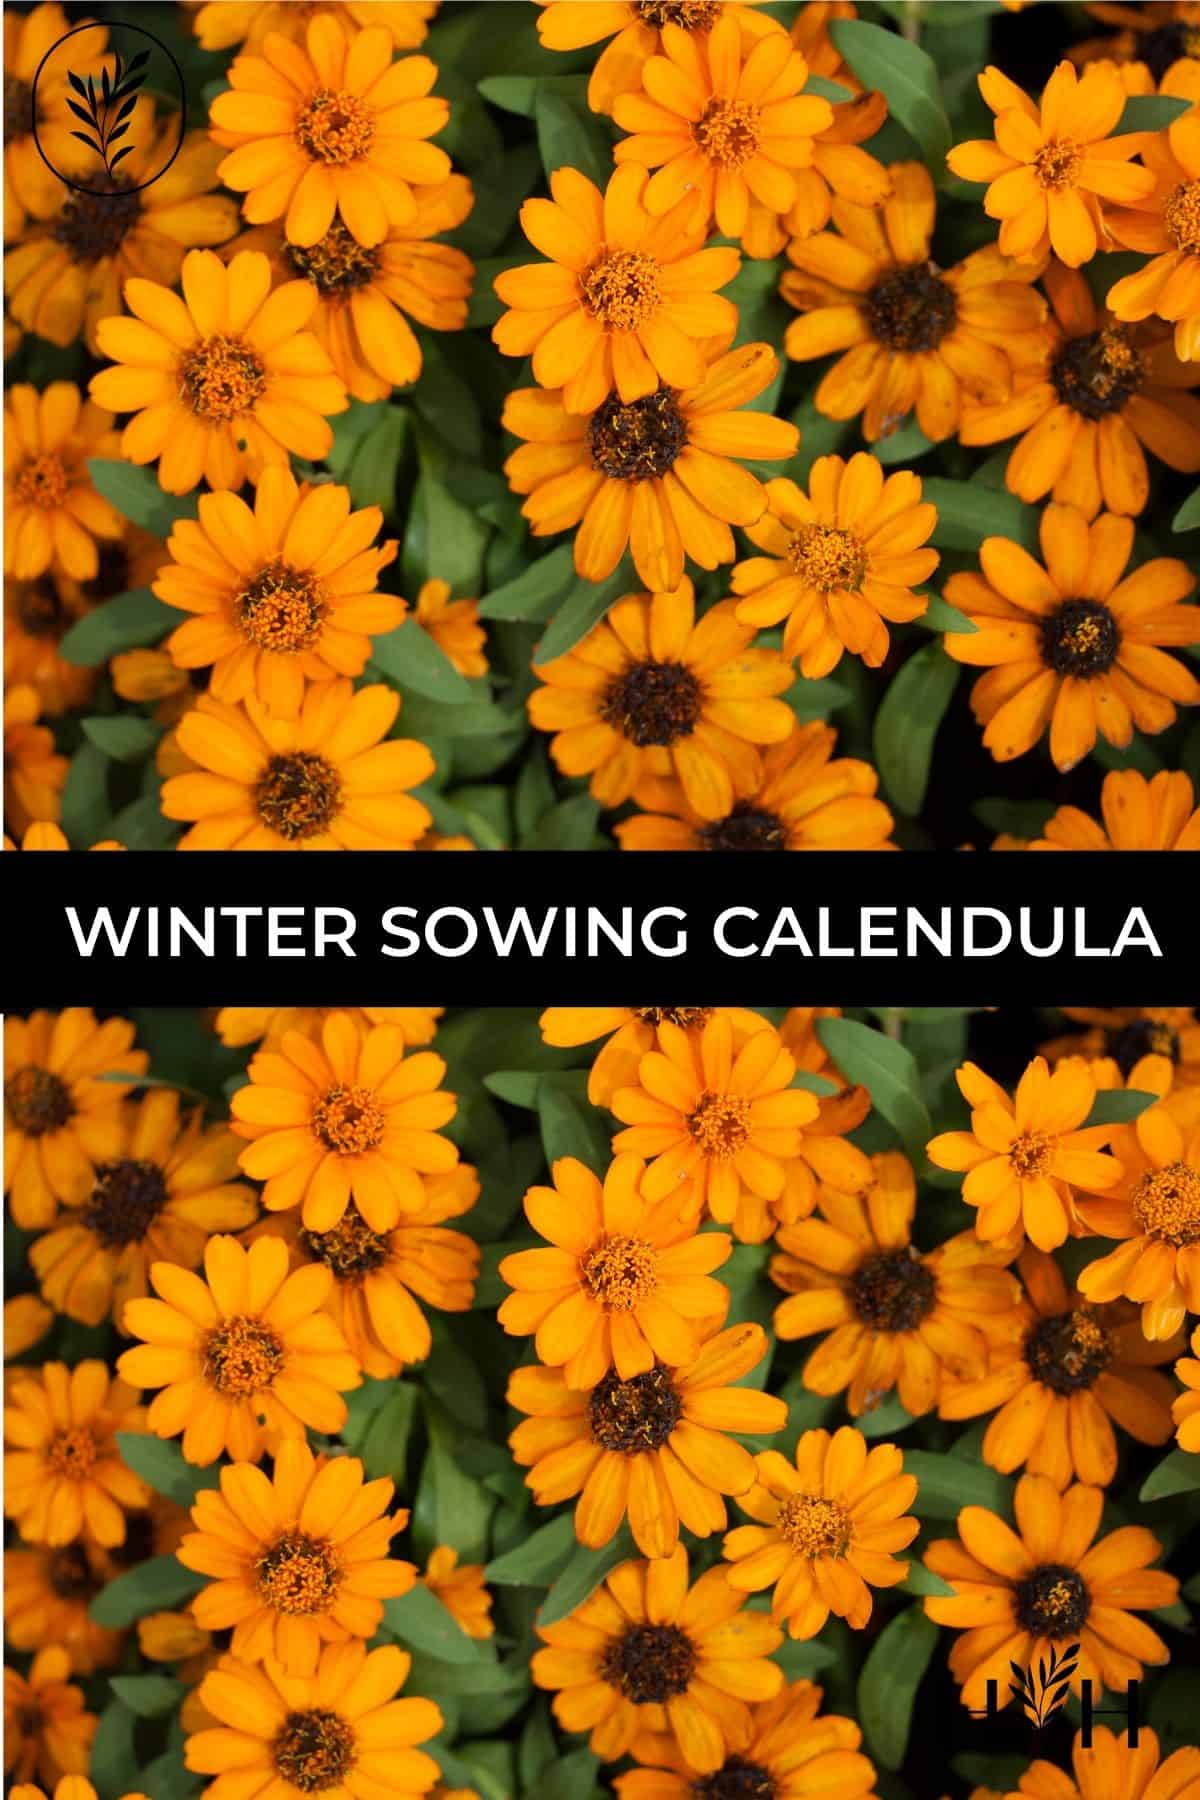 Winter sowing calendula via @home4theharvest